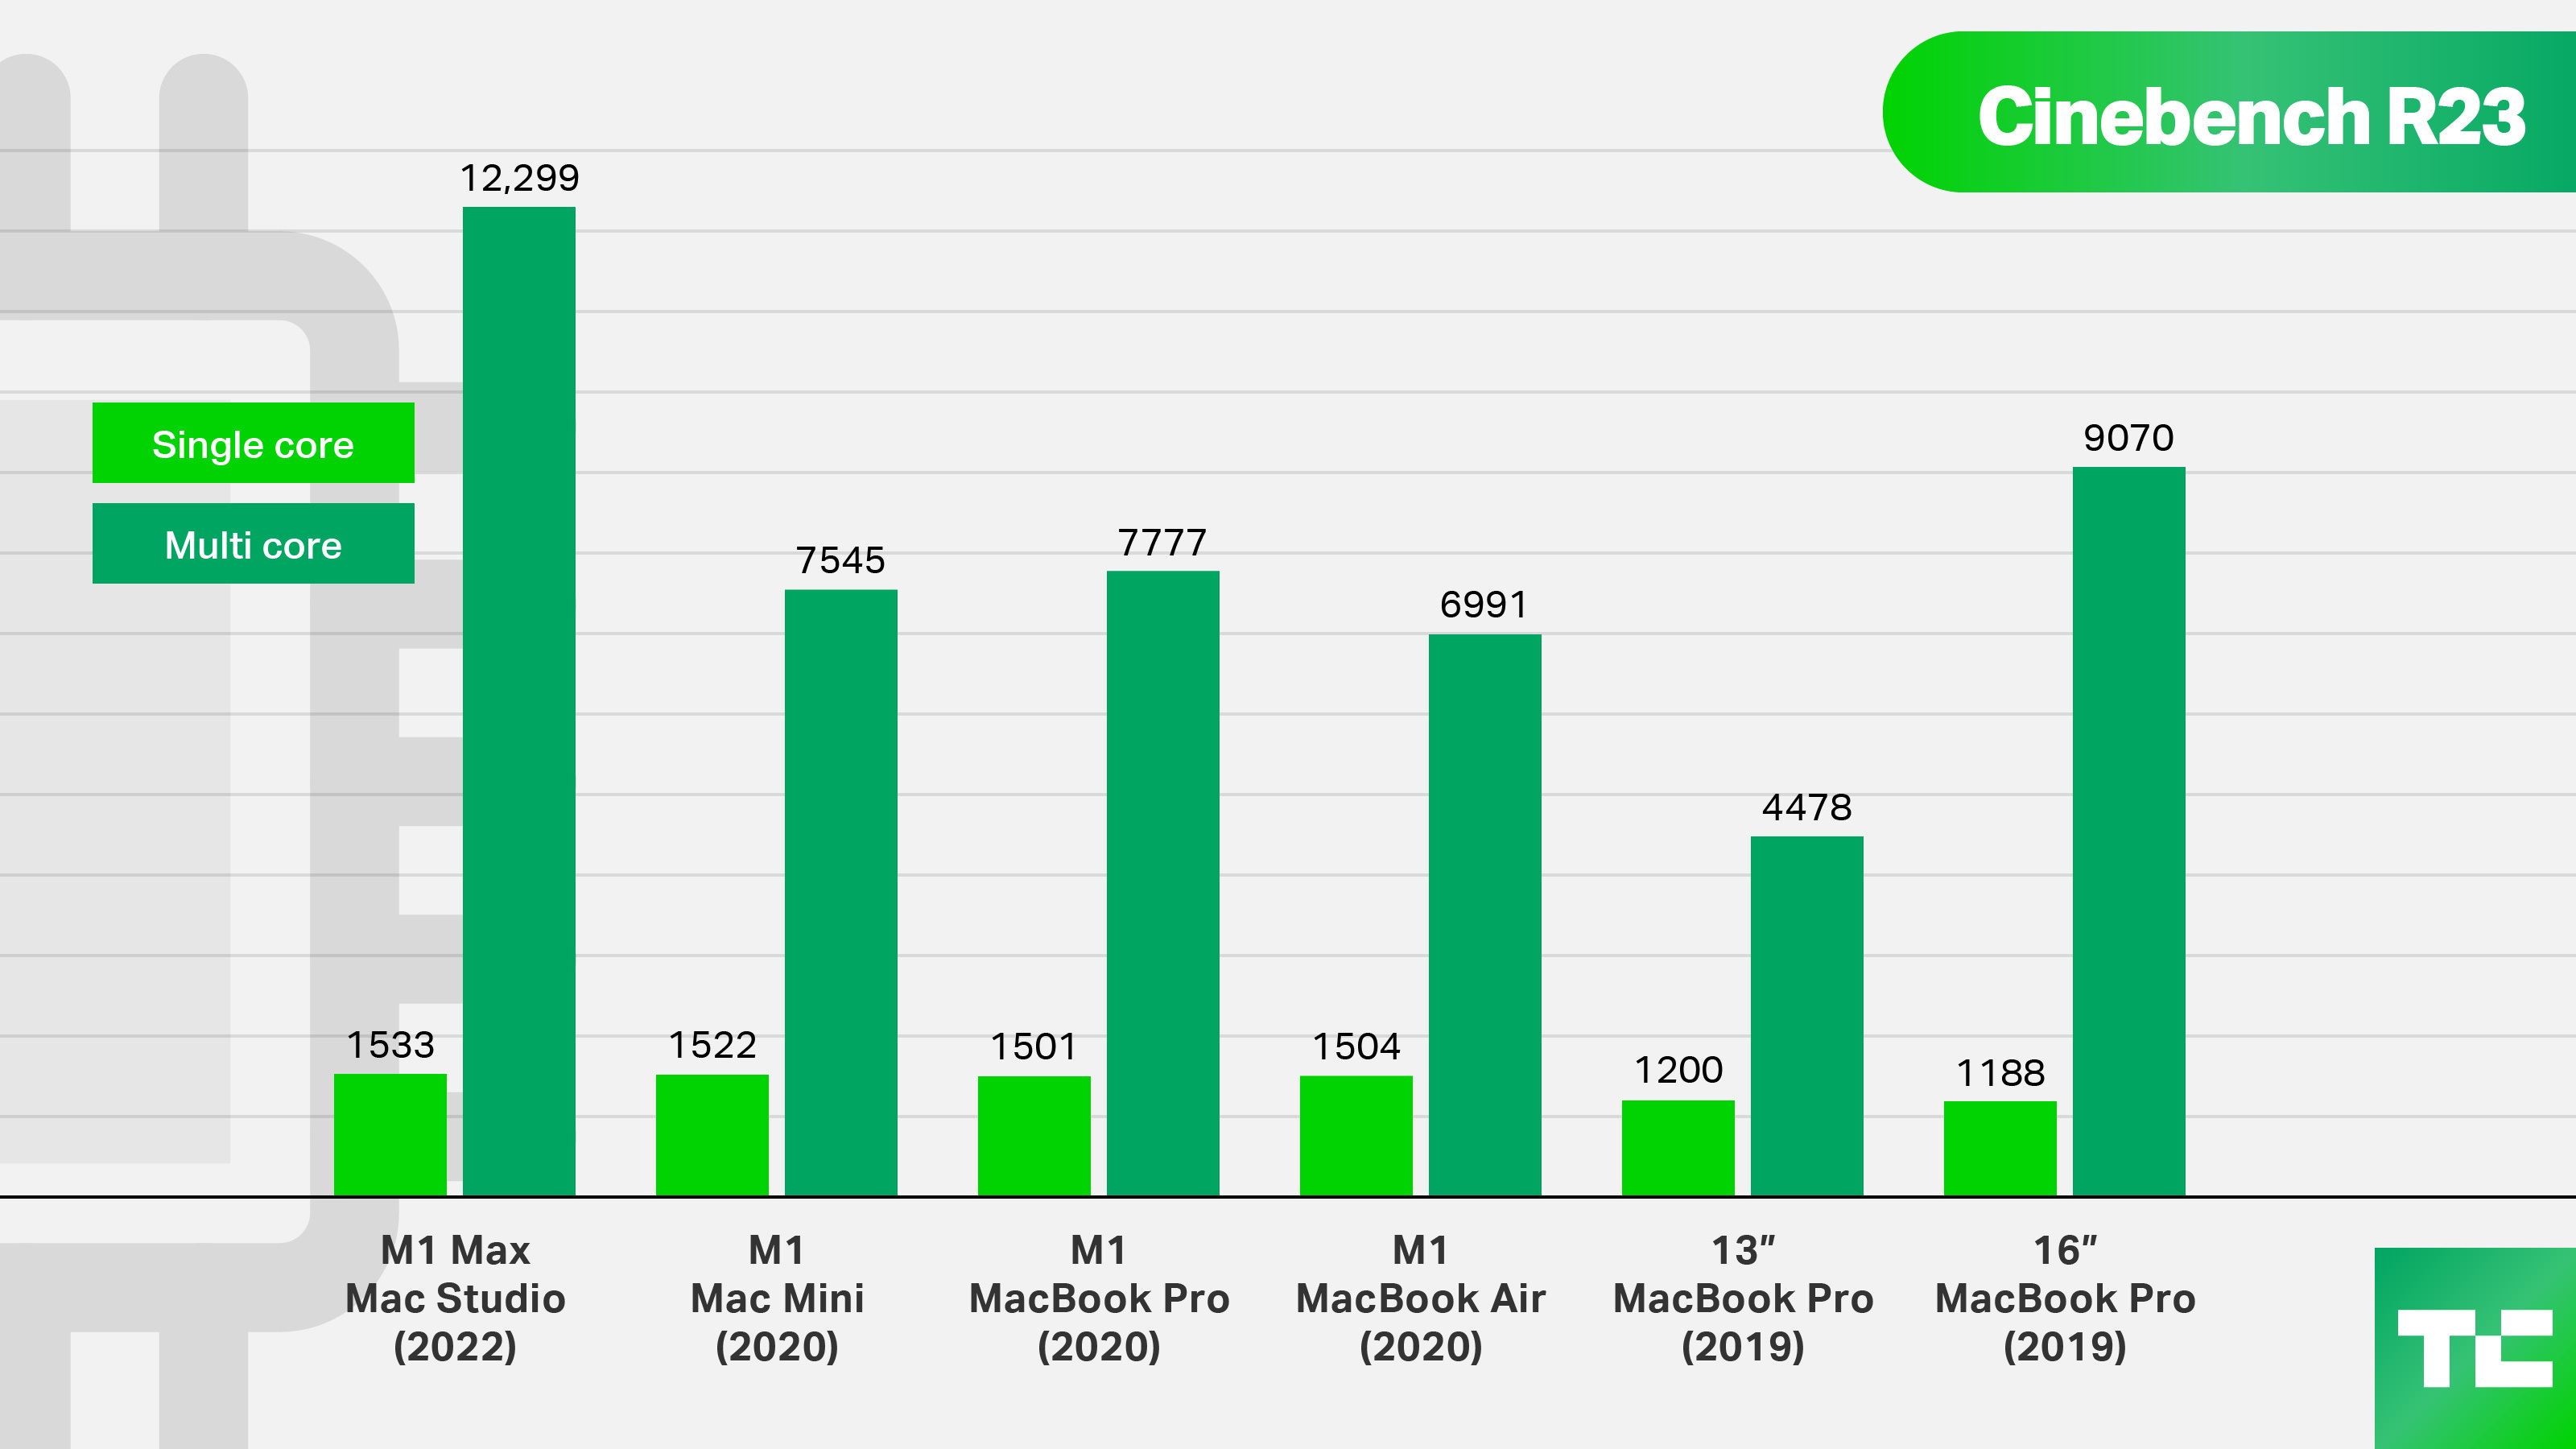 Comparing M1 Max Mac Studio to other Apple Mac releases, Cinebench R23